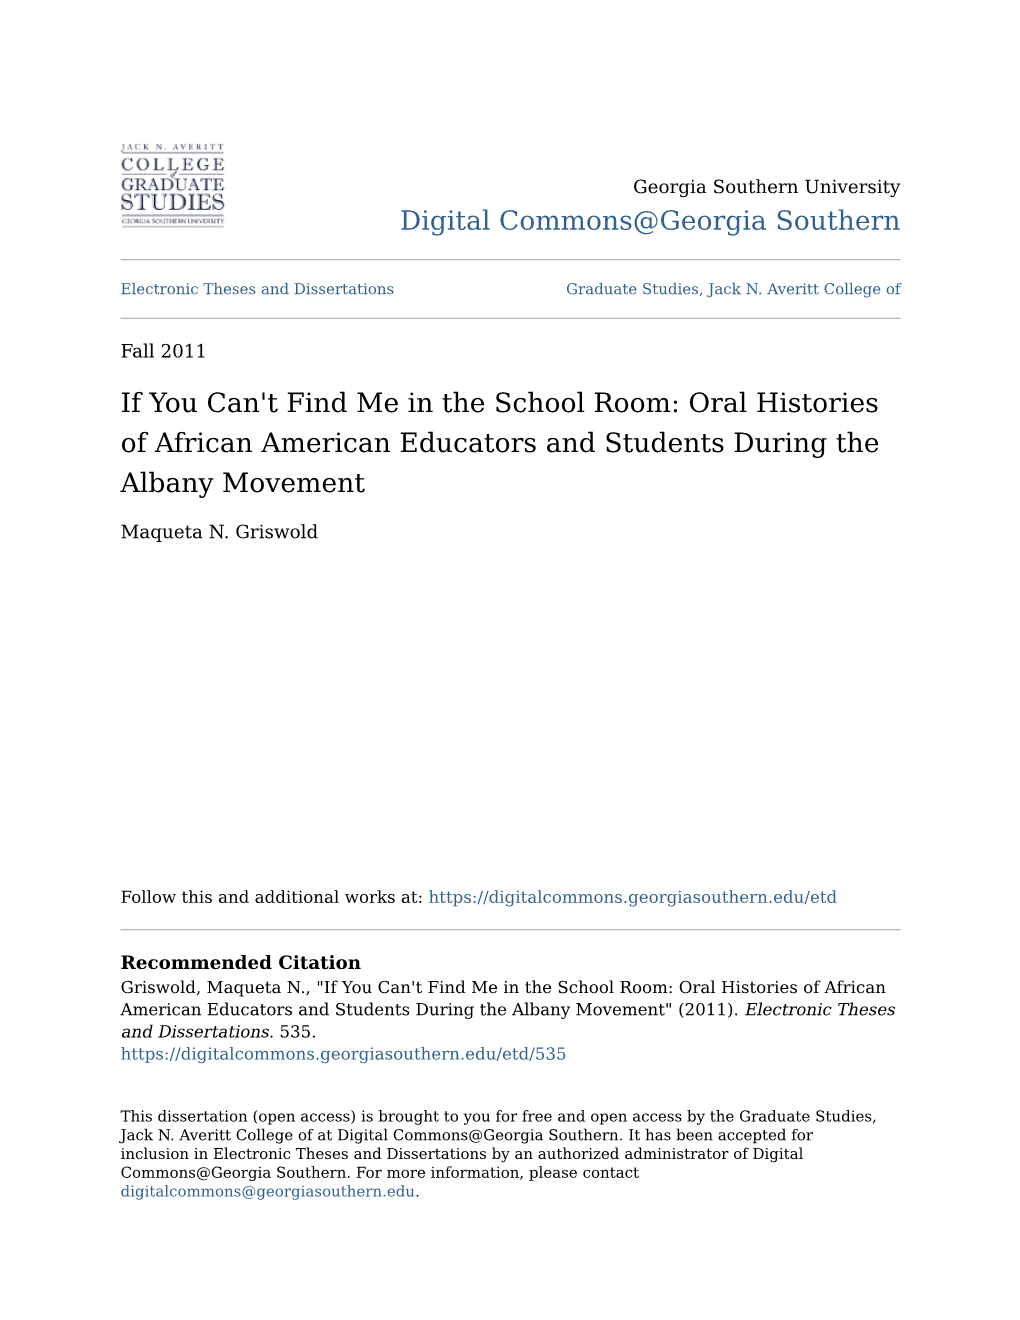 If You Can't Find Me in the School Room: Oral Histories of African American Educators and Students During the Albany Movement